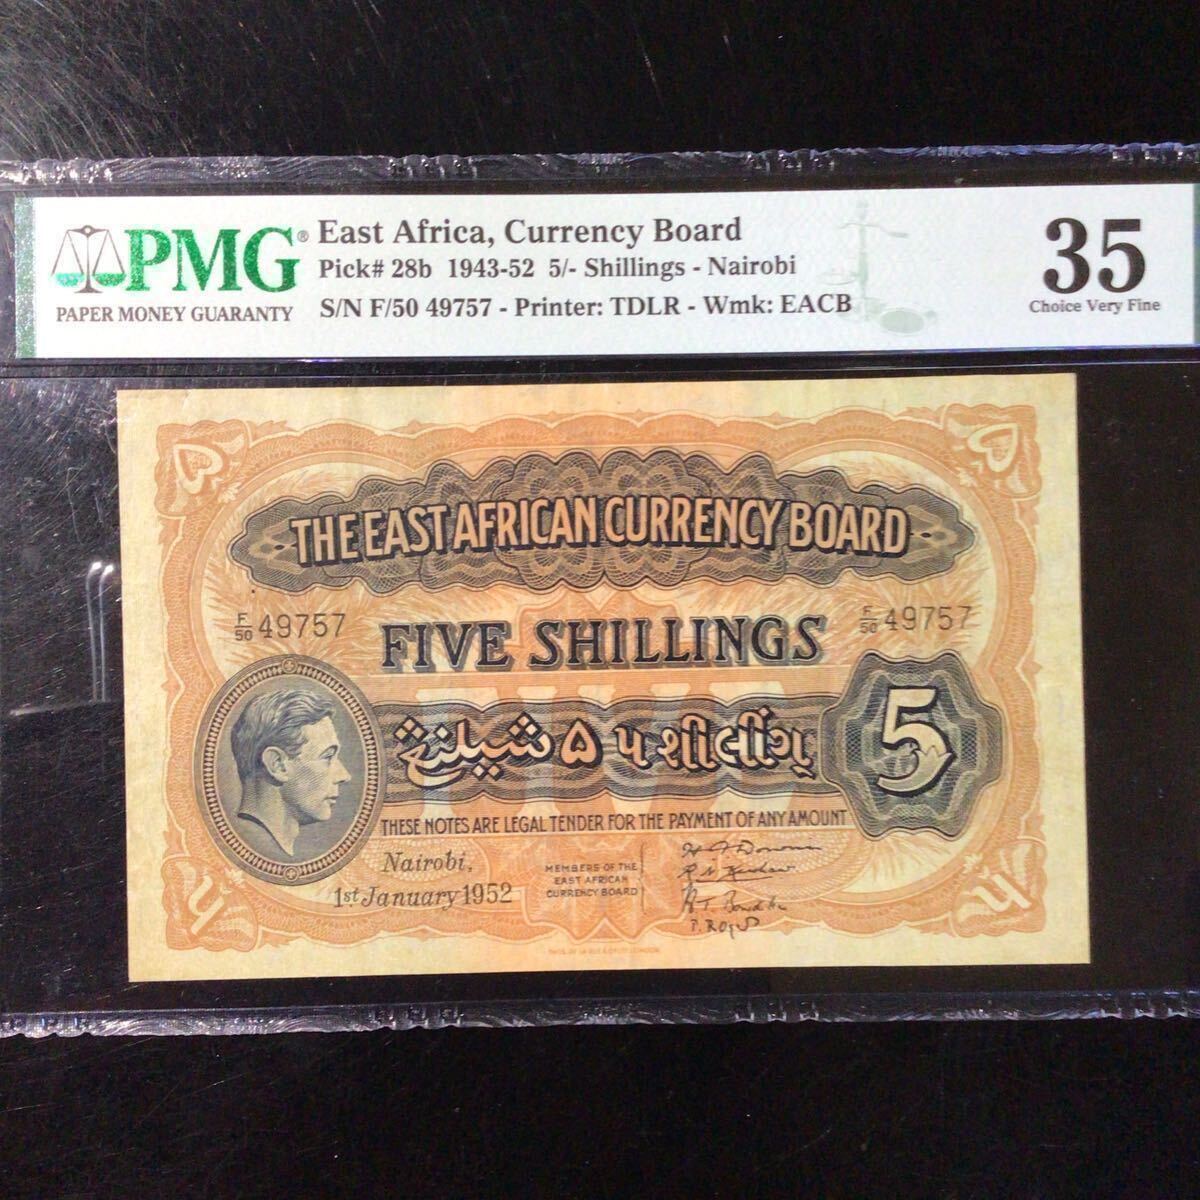 World Banknote Grading EAST AFRICA《Currency Board》5 Shillings【1952】『PMG Grading Choice Very Fine 35』_画像1